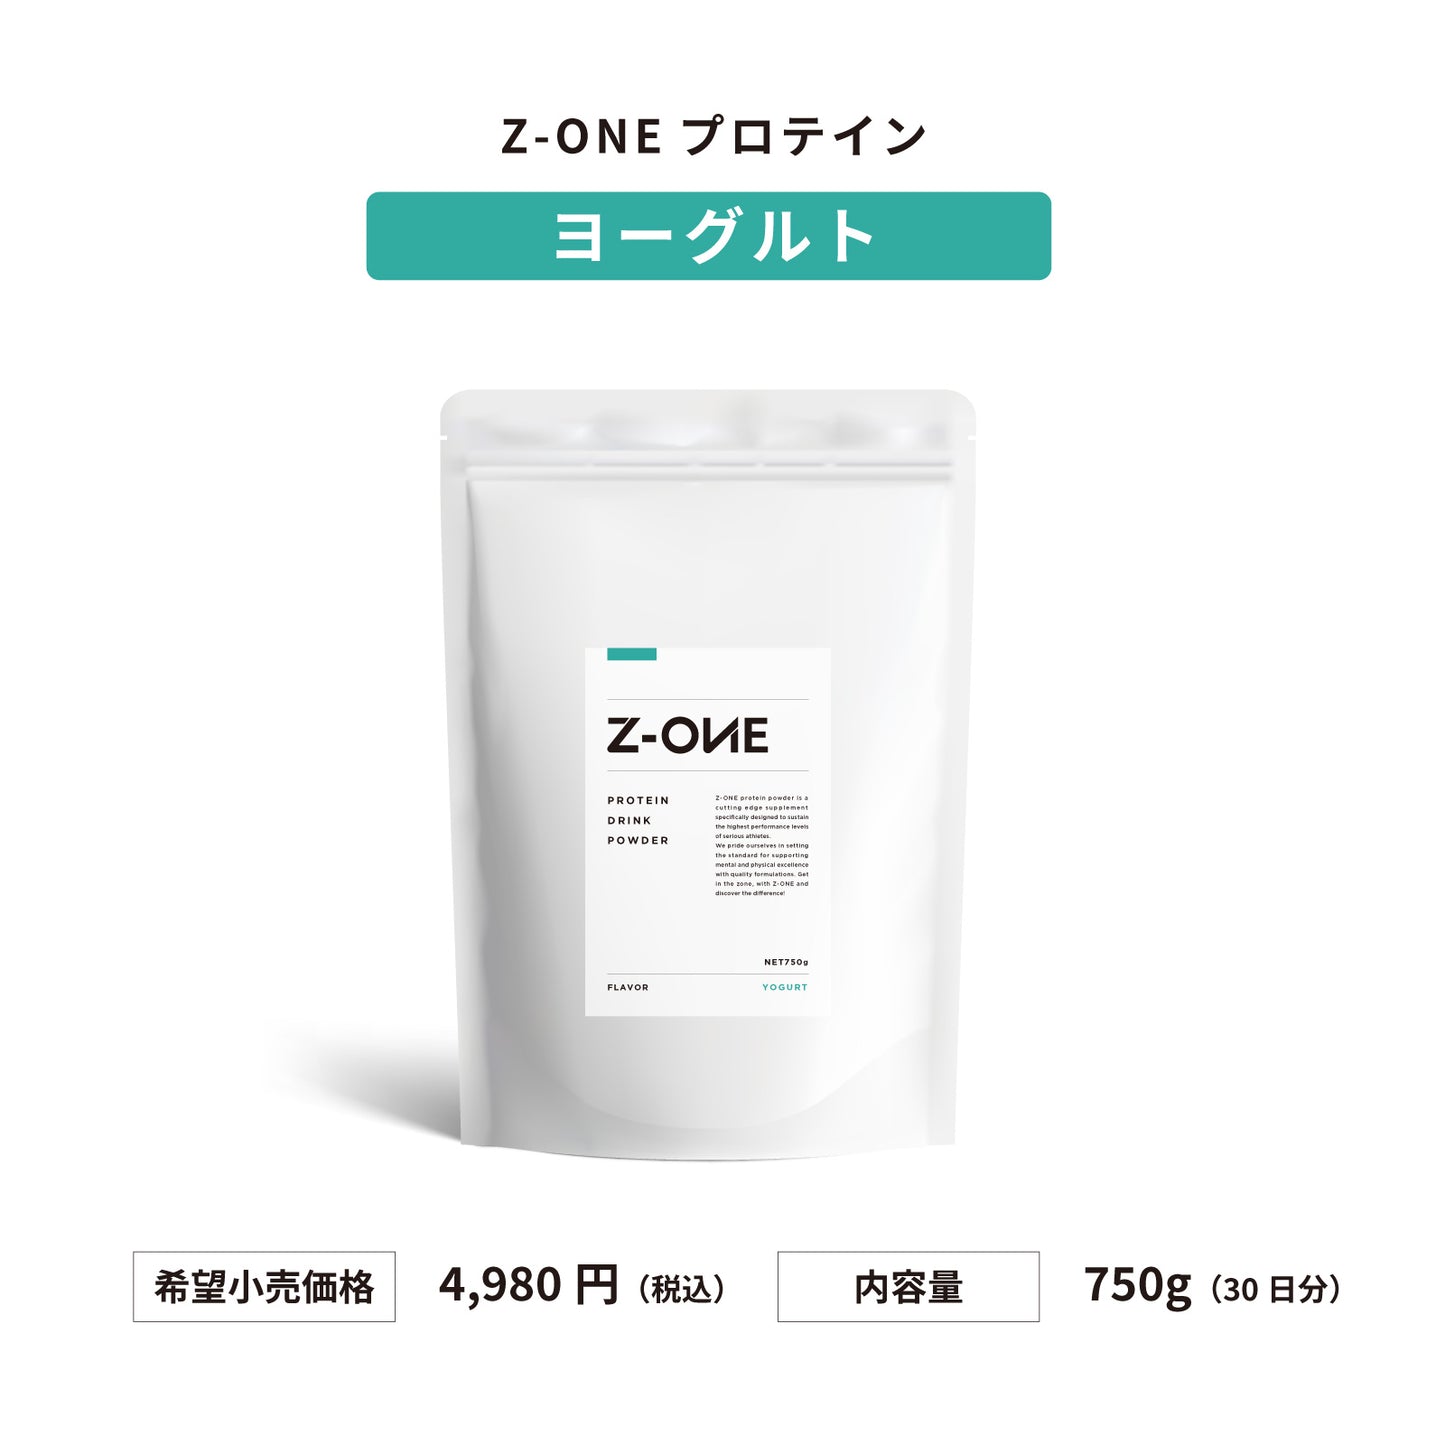 Z-ONE PROTEIN(ゾーンプロテイン) ヨーグルト味